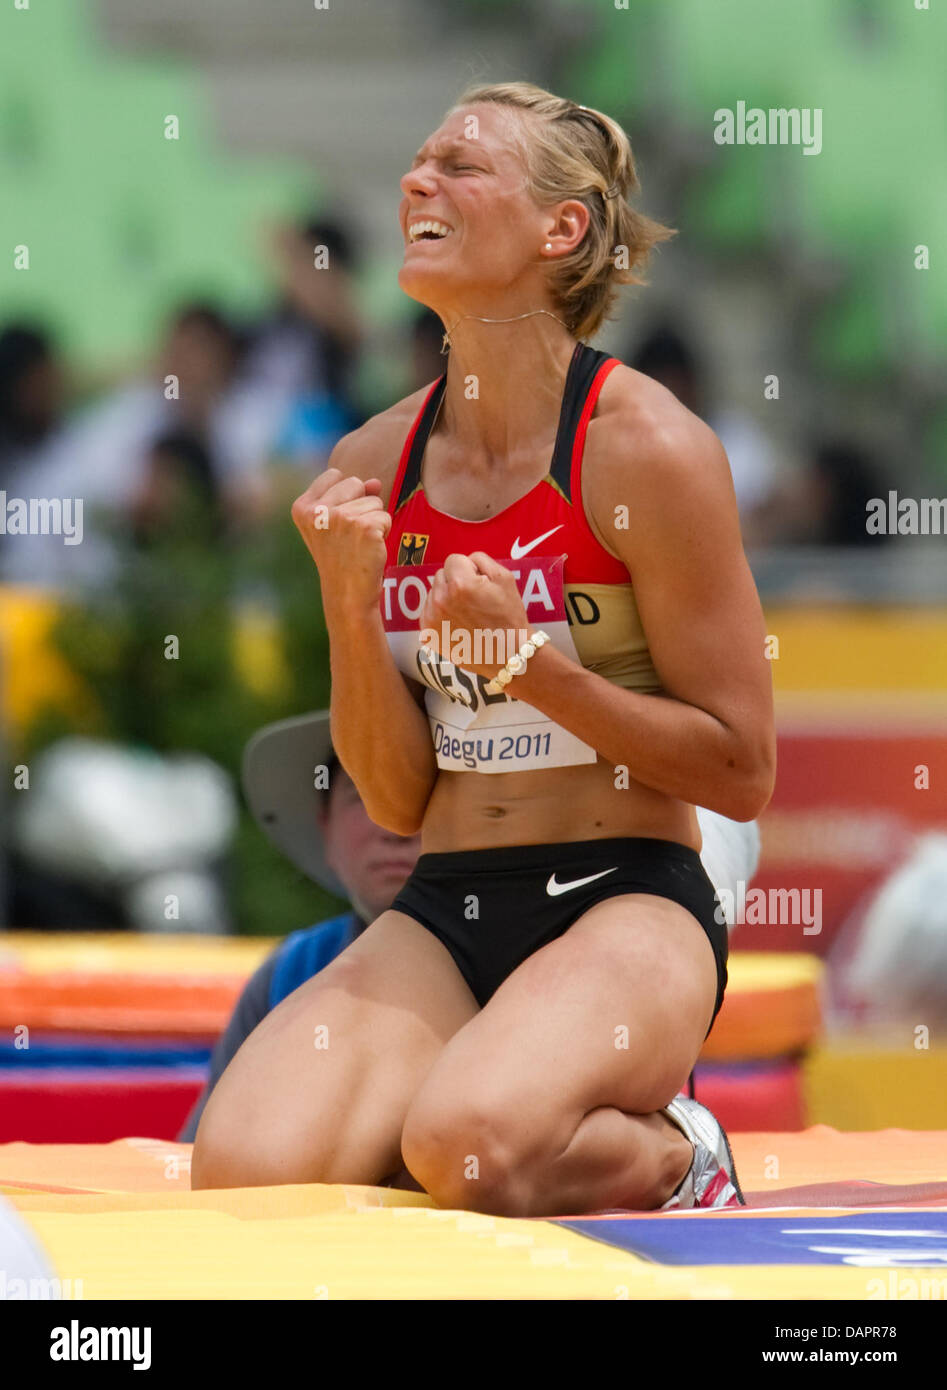 Jennifer Oeser of Germany reacts in the womens High Jump event of the Heptathlon competition at the 13th IAAF World Championships in Athletics, in Daegu, Republic of Korea, 29 August 2011. Photo: Bernd Thissen dpa Stock Photo